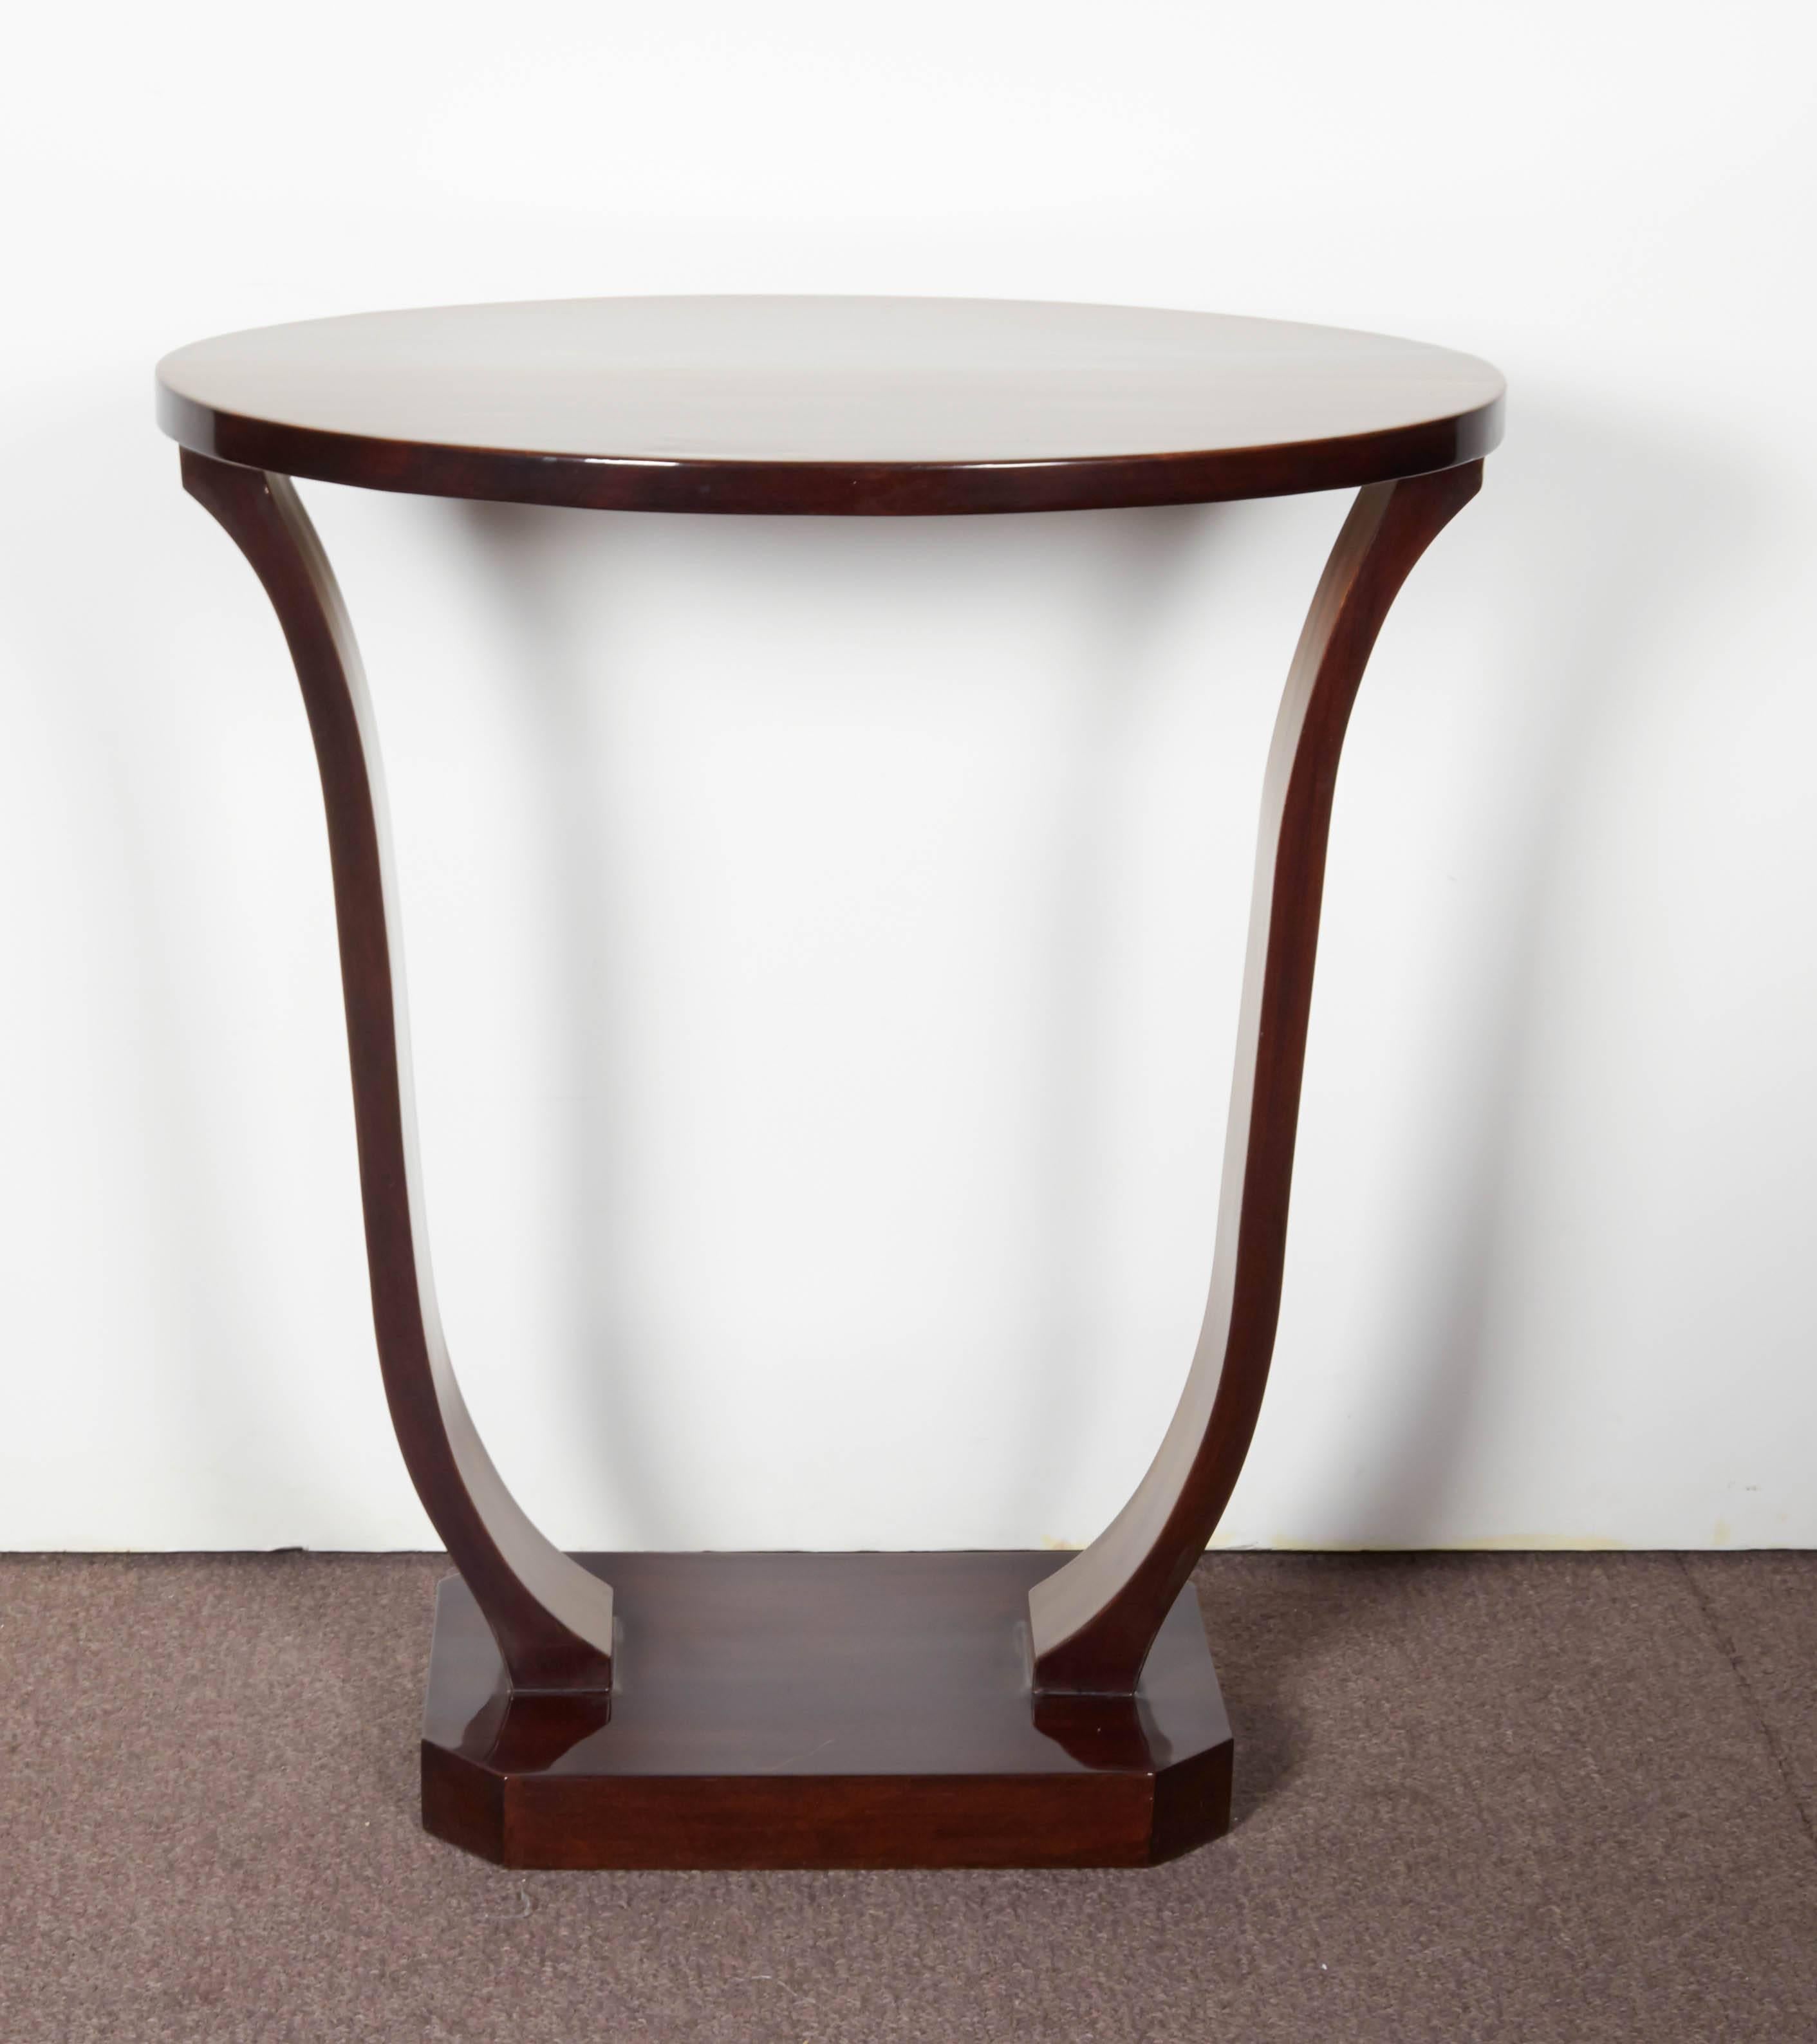 An original French Art Deco stylish oval table with curved leg base resting on rectangular plinth with truncated corners.
Can be used as a sofa table, night table, pedestal, corner table, gueridon...